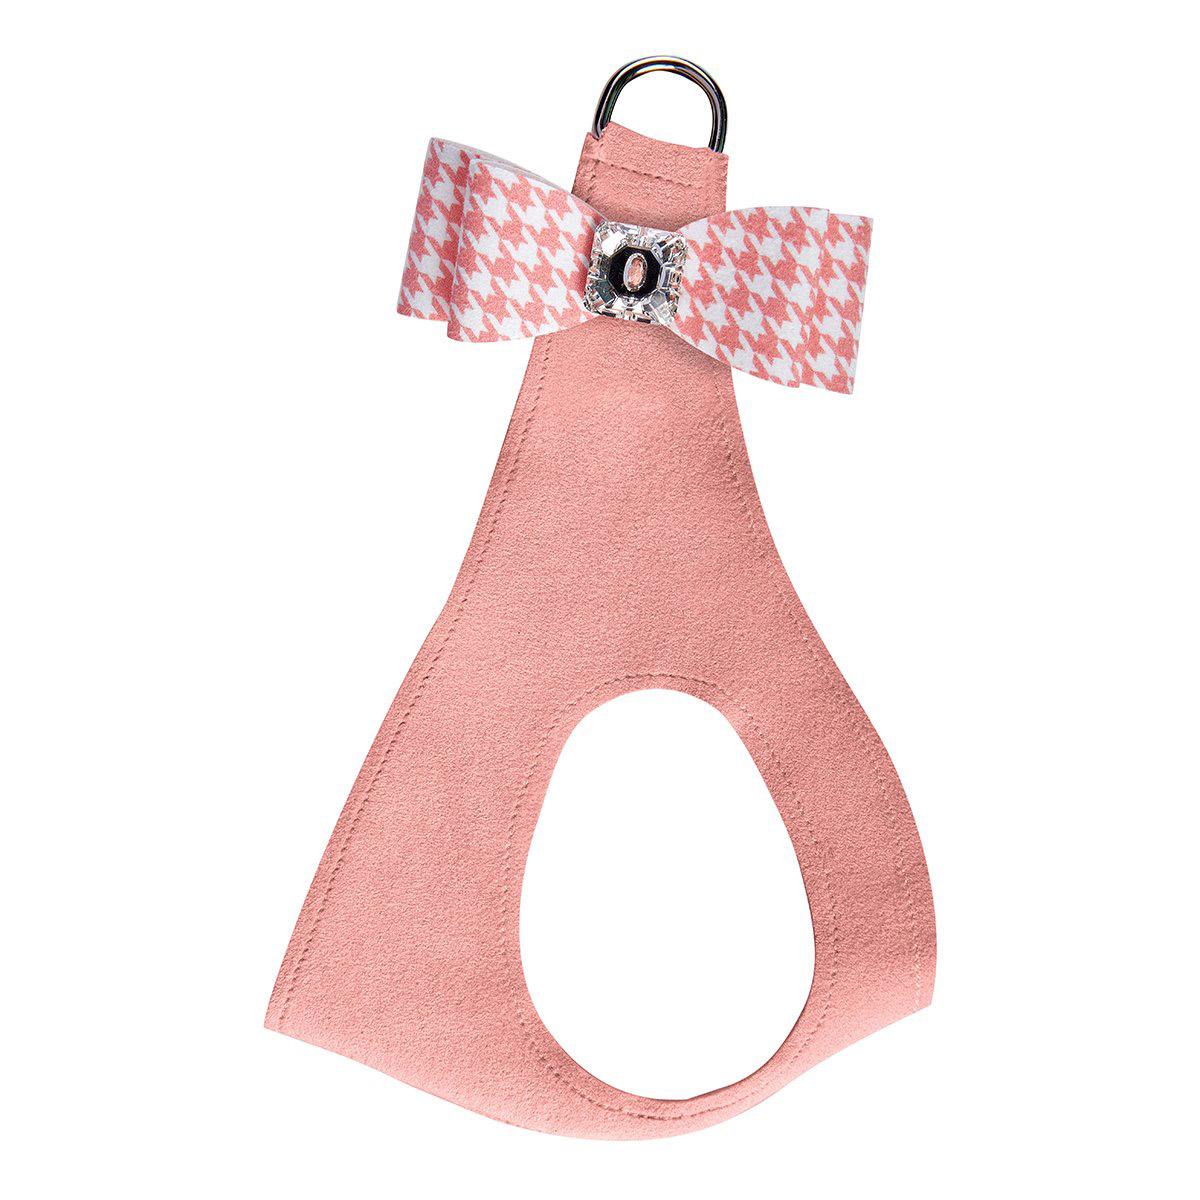 Peaches & Cream Houndstooth Big Bow Step-In Dog Harness by Susan Lanci